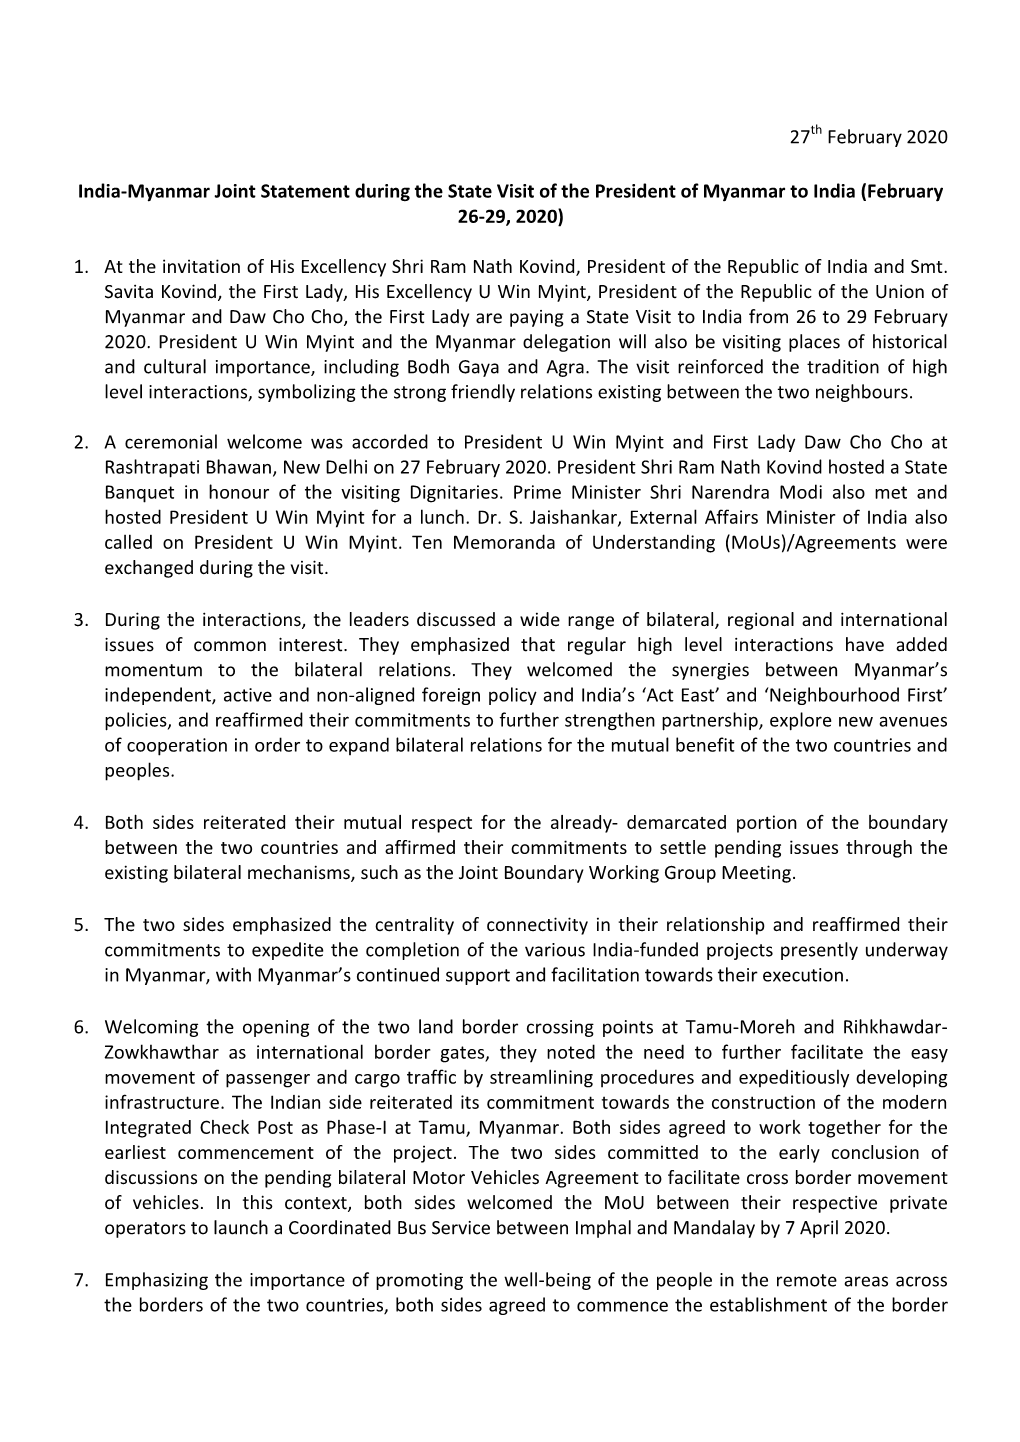 27Th February 2020 India-Myanmar Joint Statement During the State